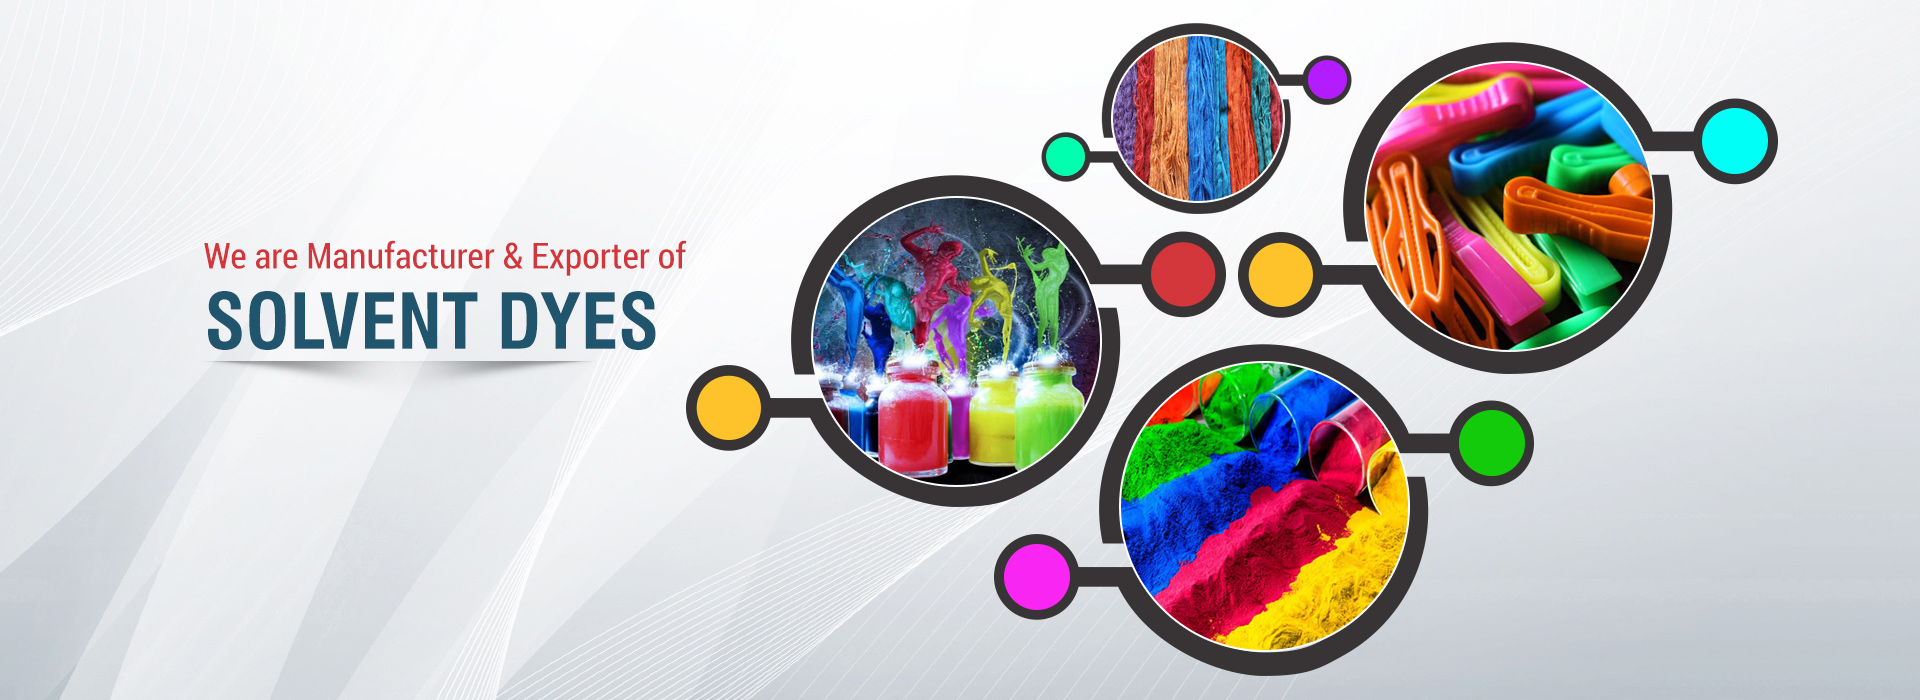 Solvent Dyes Manufacturer and Exporter